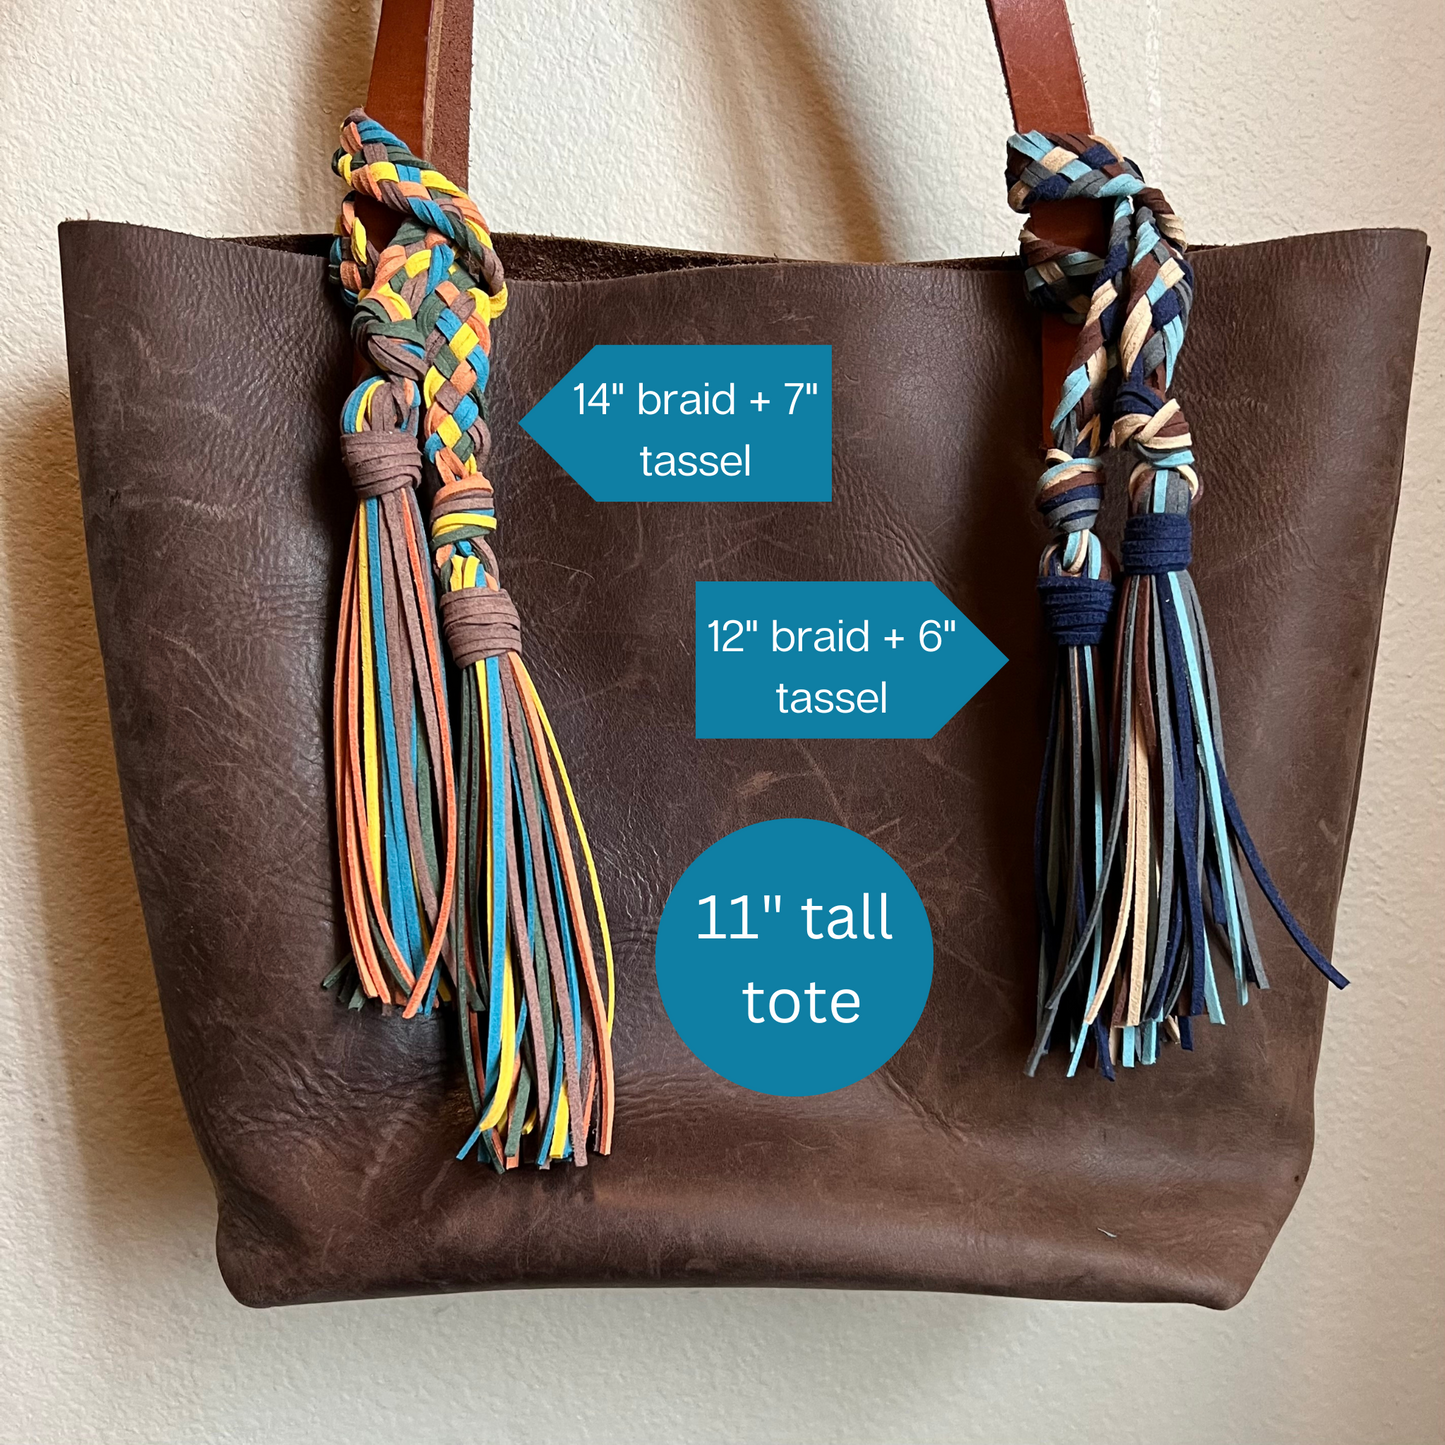 Bag Charm Deluxe Wide Braid with Tassels for Purses & Totes Faux Suede Leather